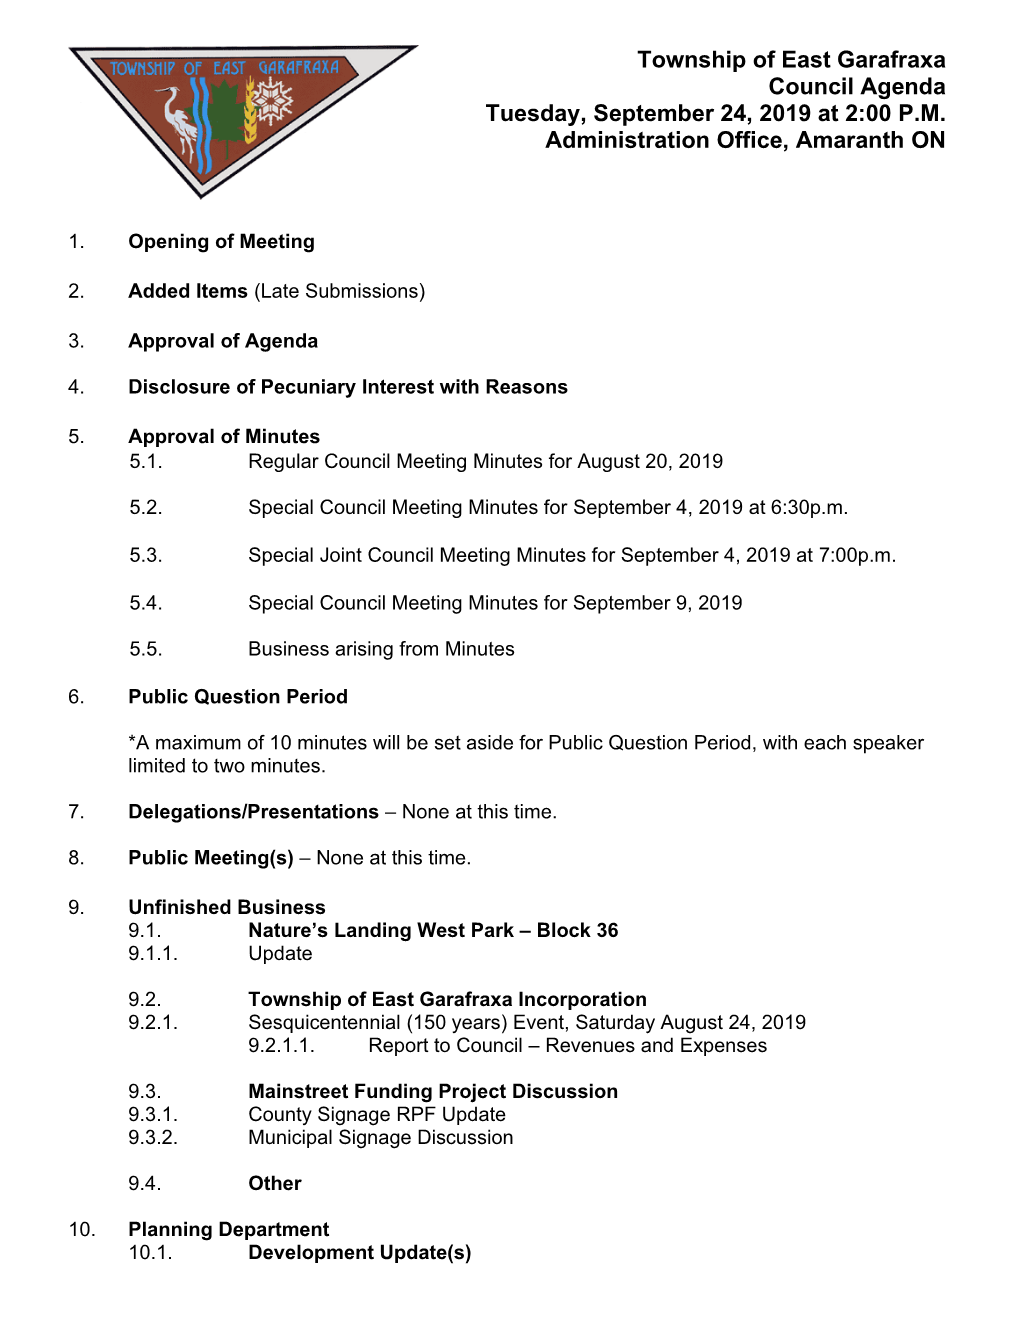 Township of East Garafraxa Council Agenda Tuesday, September 24, 2019 at 2:00 P.M. Administration Office, Amaranth ON